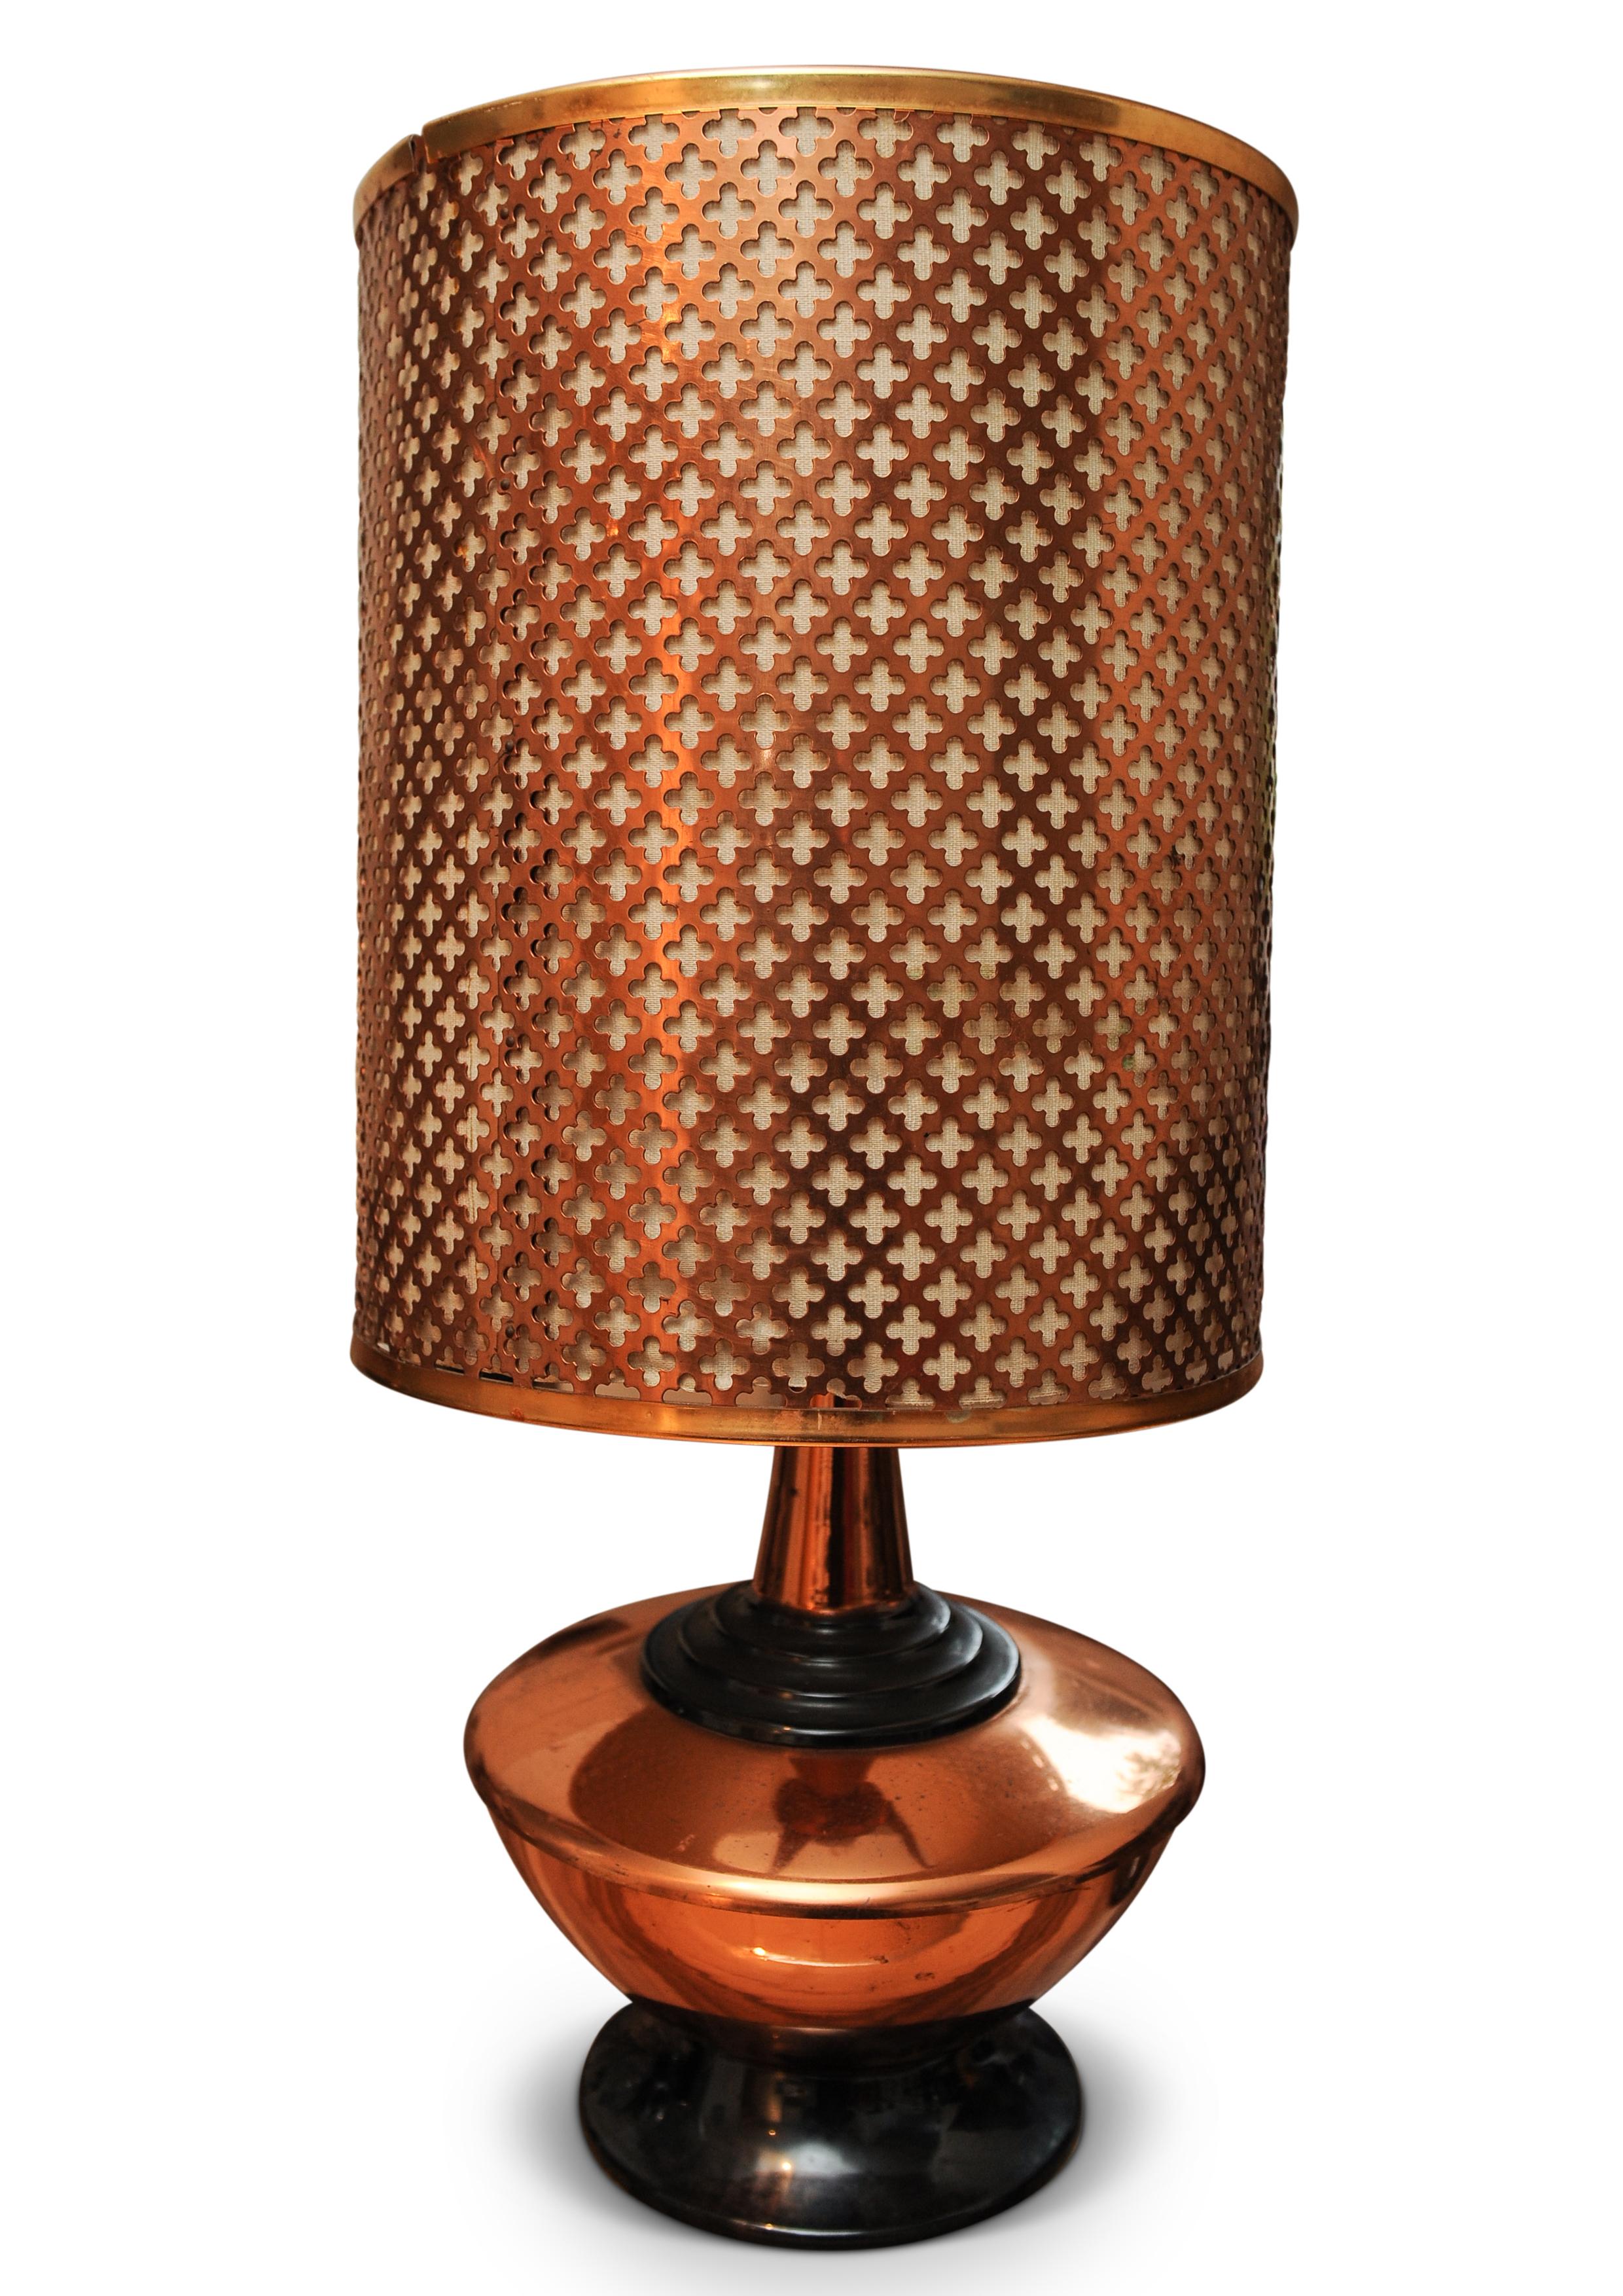 A Mid Century Zambian Copper Table Lamp With An Alhambra Design To Light Shade In Good Condition For Sale In High Wycombe, GB